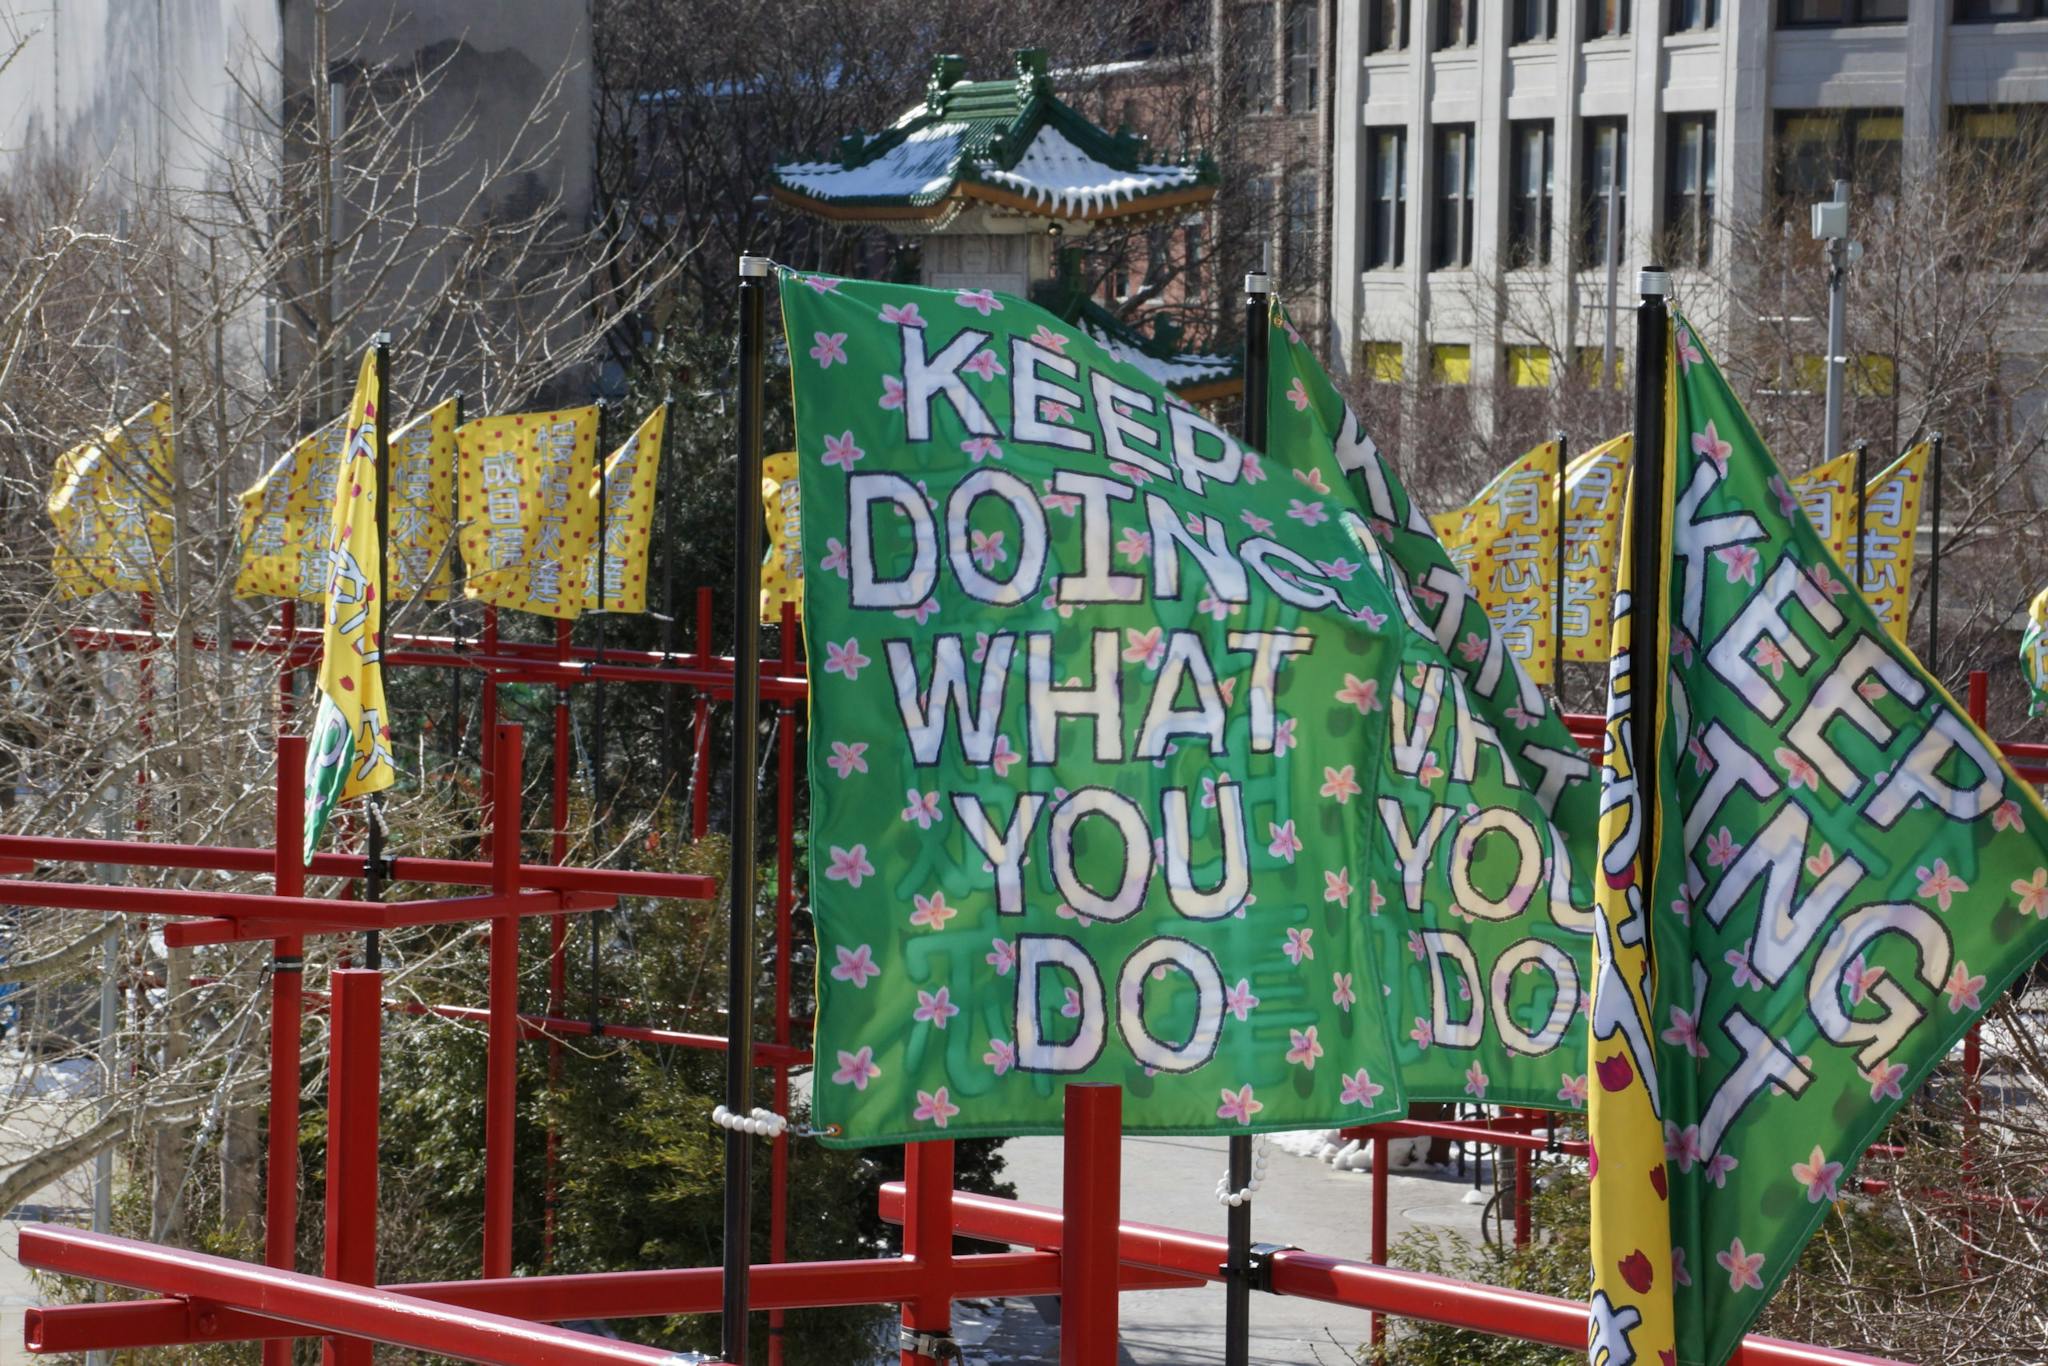 A green banner reading "Keep Doing What You Do" is part of a public artwork by Andy Li.